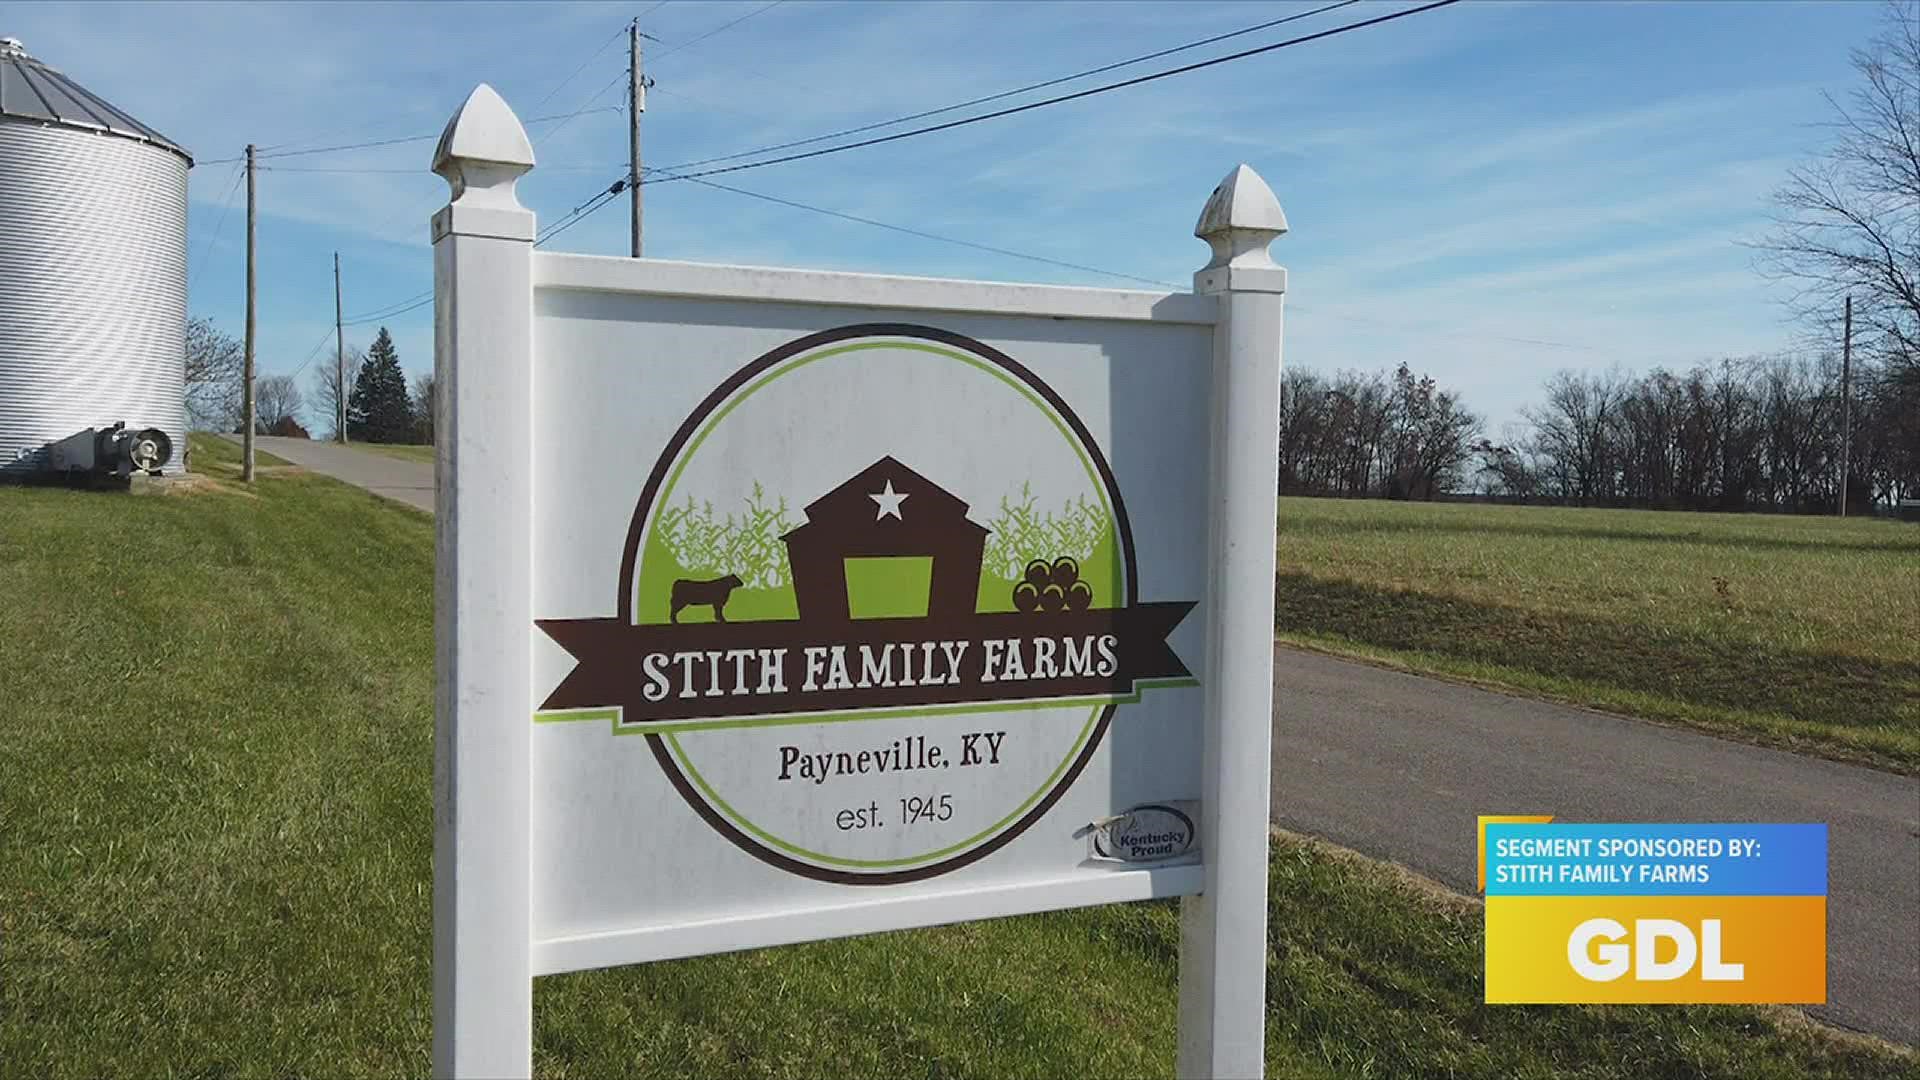 Stith Family Farms is located at 5168 Sirocco Rd. in Payneville, KY. For more information, visit stithfamilyfarms.com.